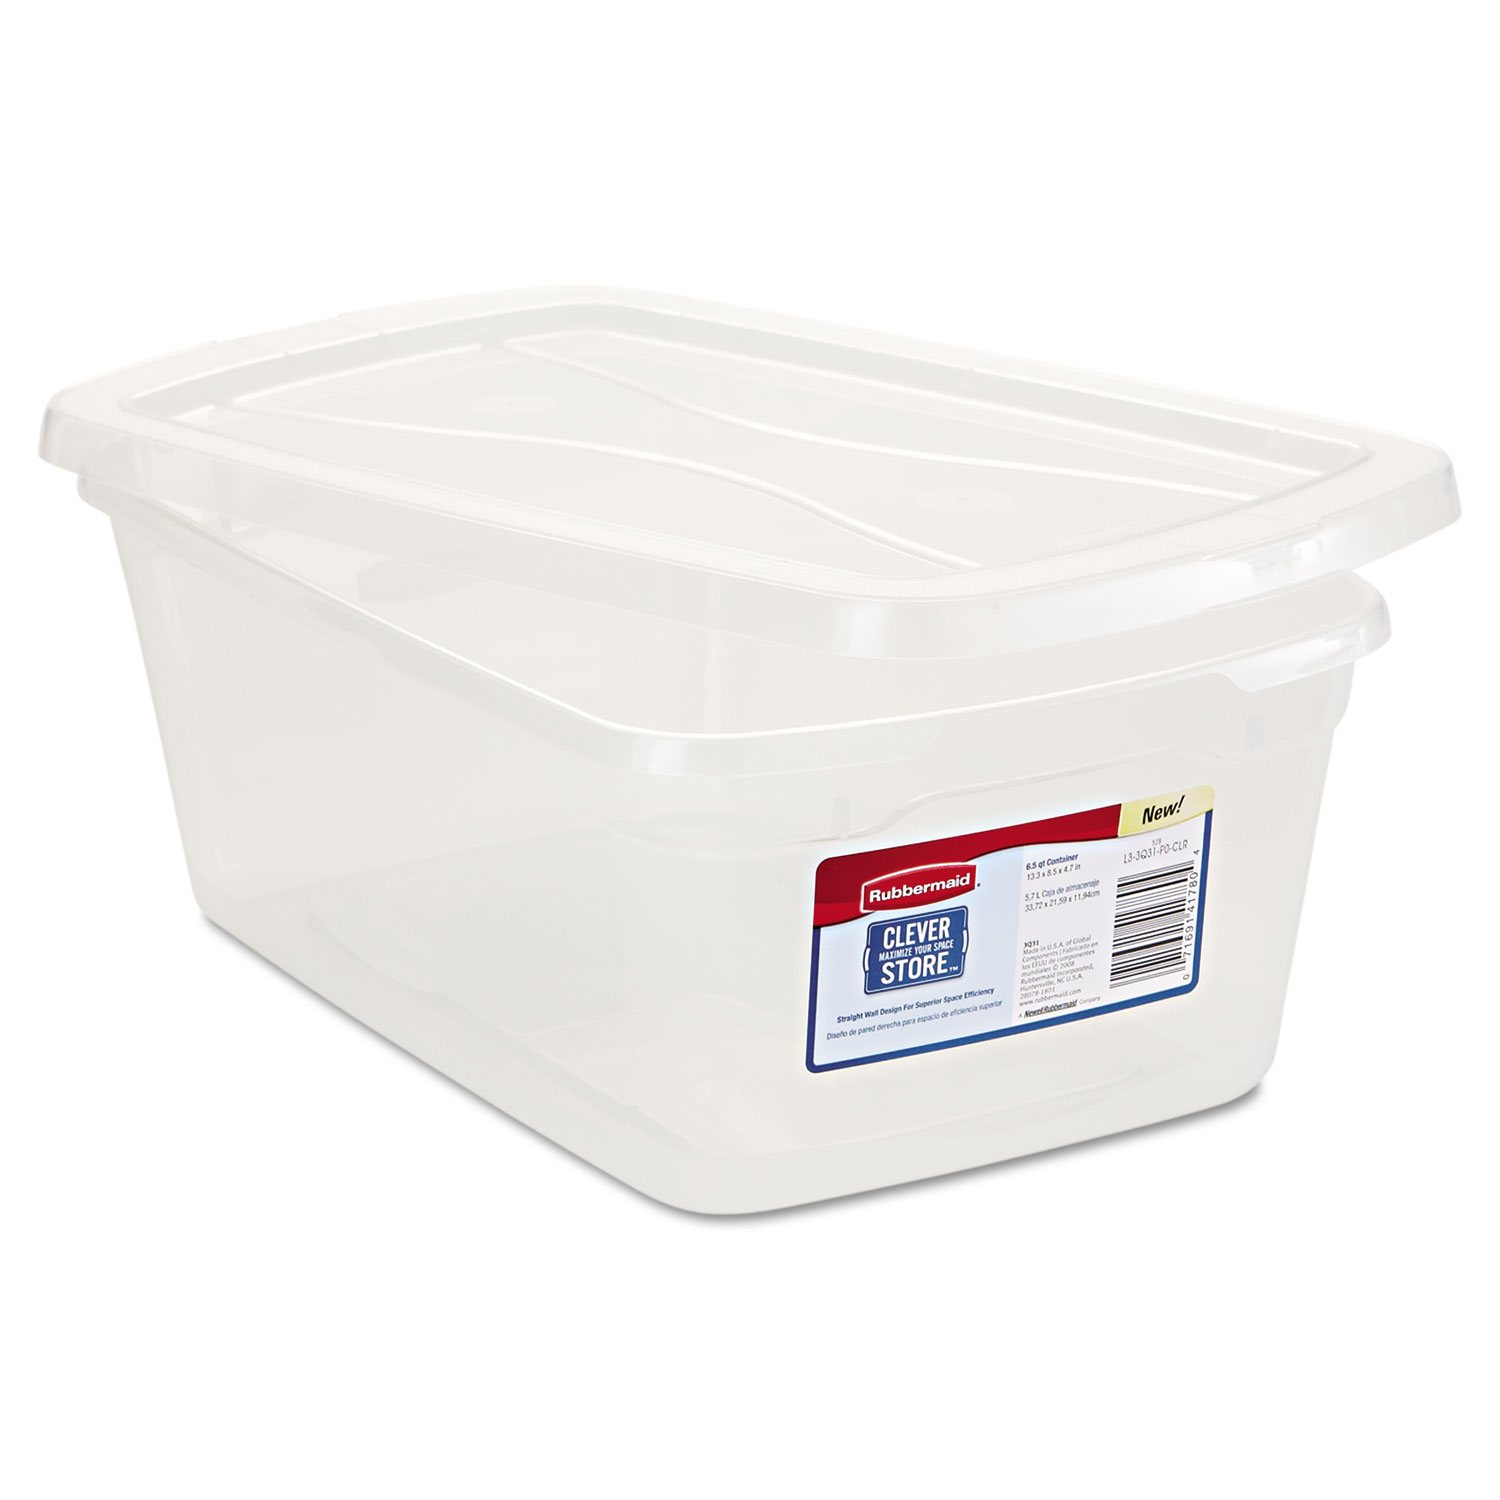 Clever Store Snap-Lid Container, 8 1/2 x 13 3/8 x 4 3/4, 6 1/2 qt, Clear, 10/CT